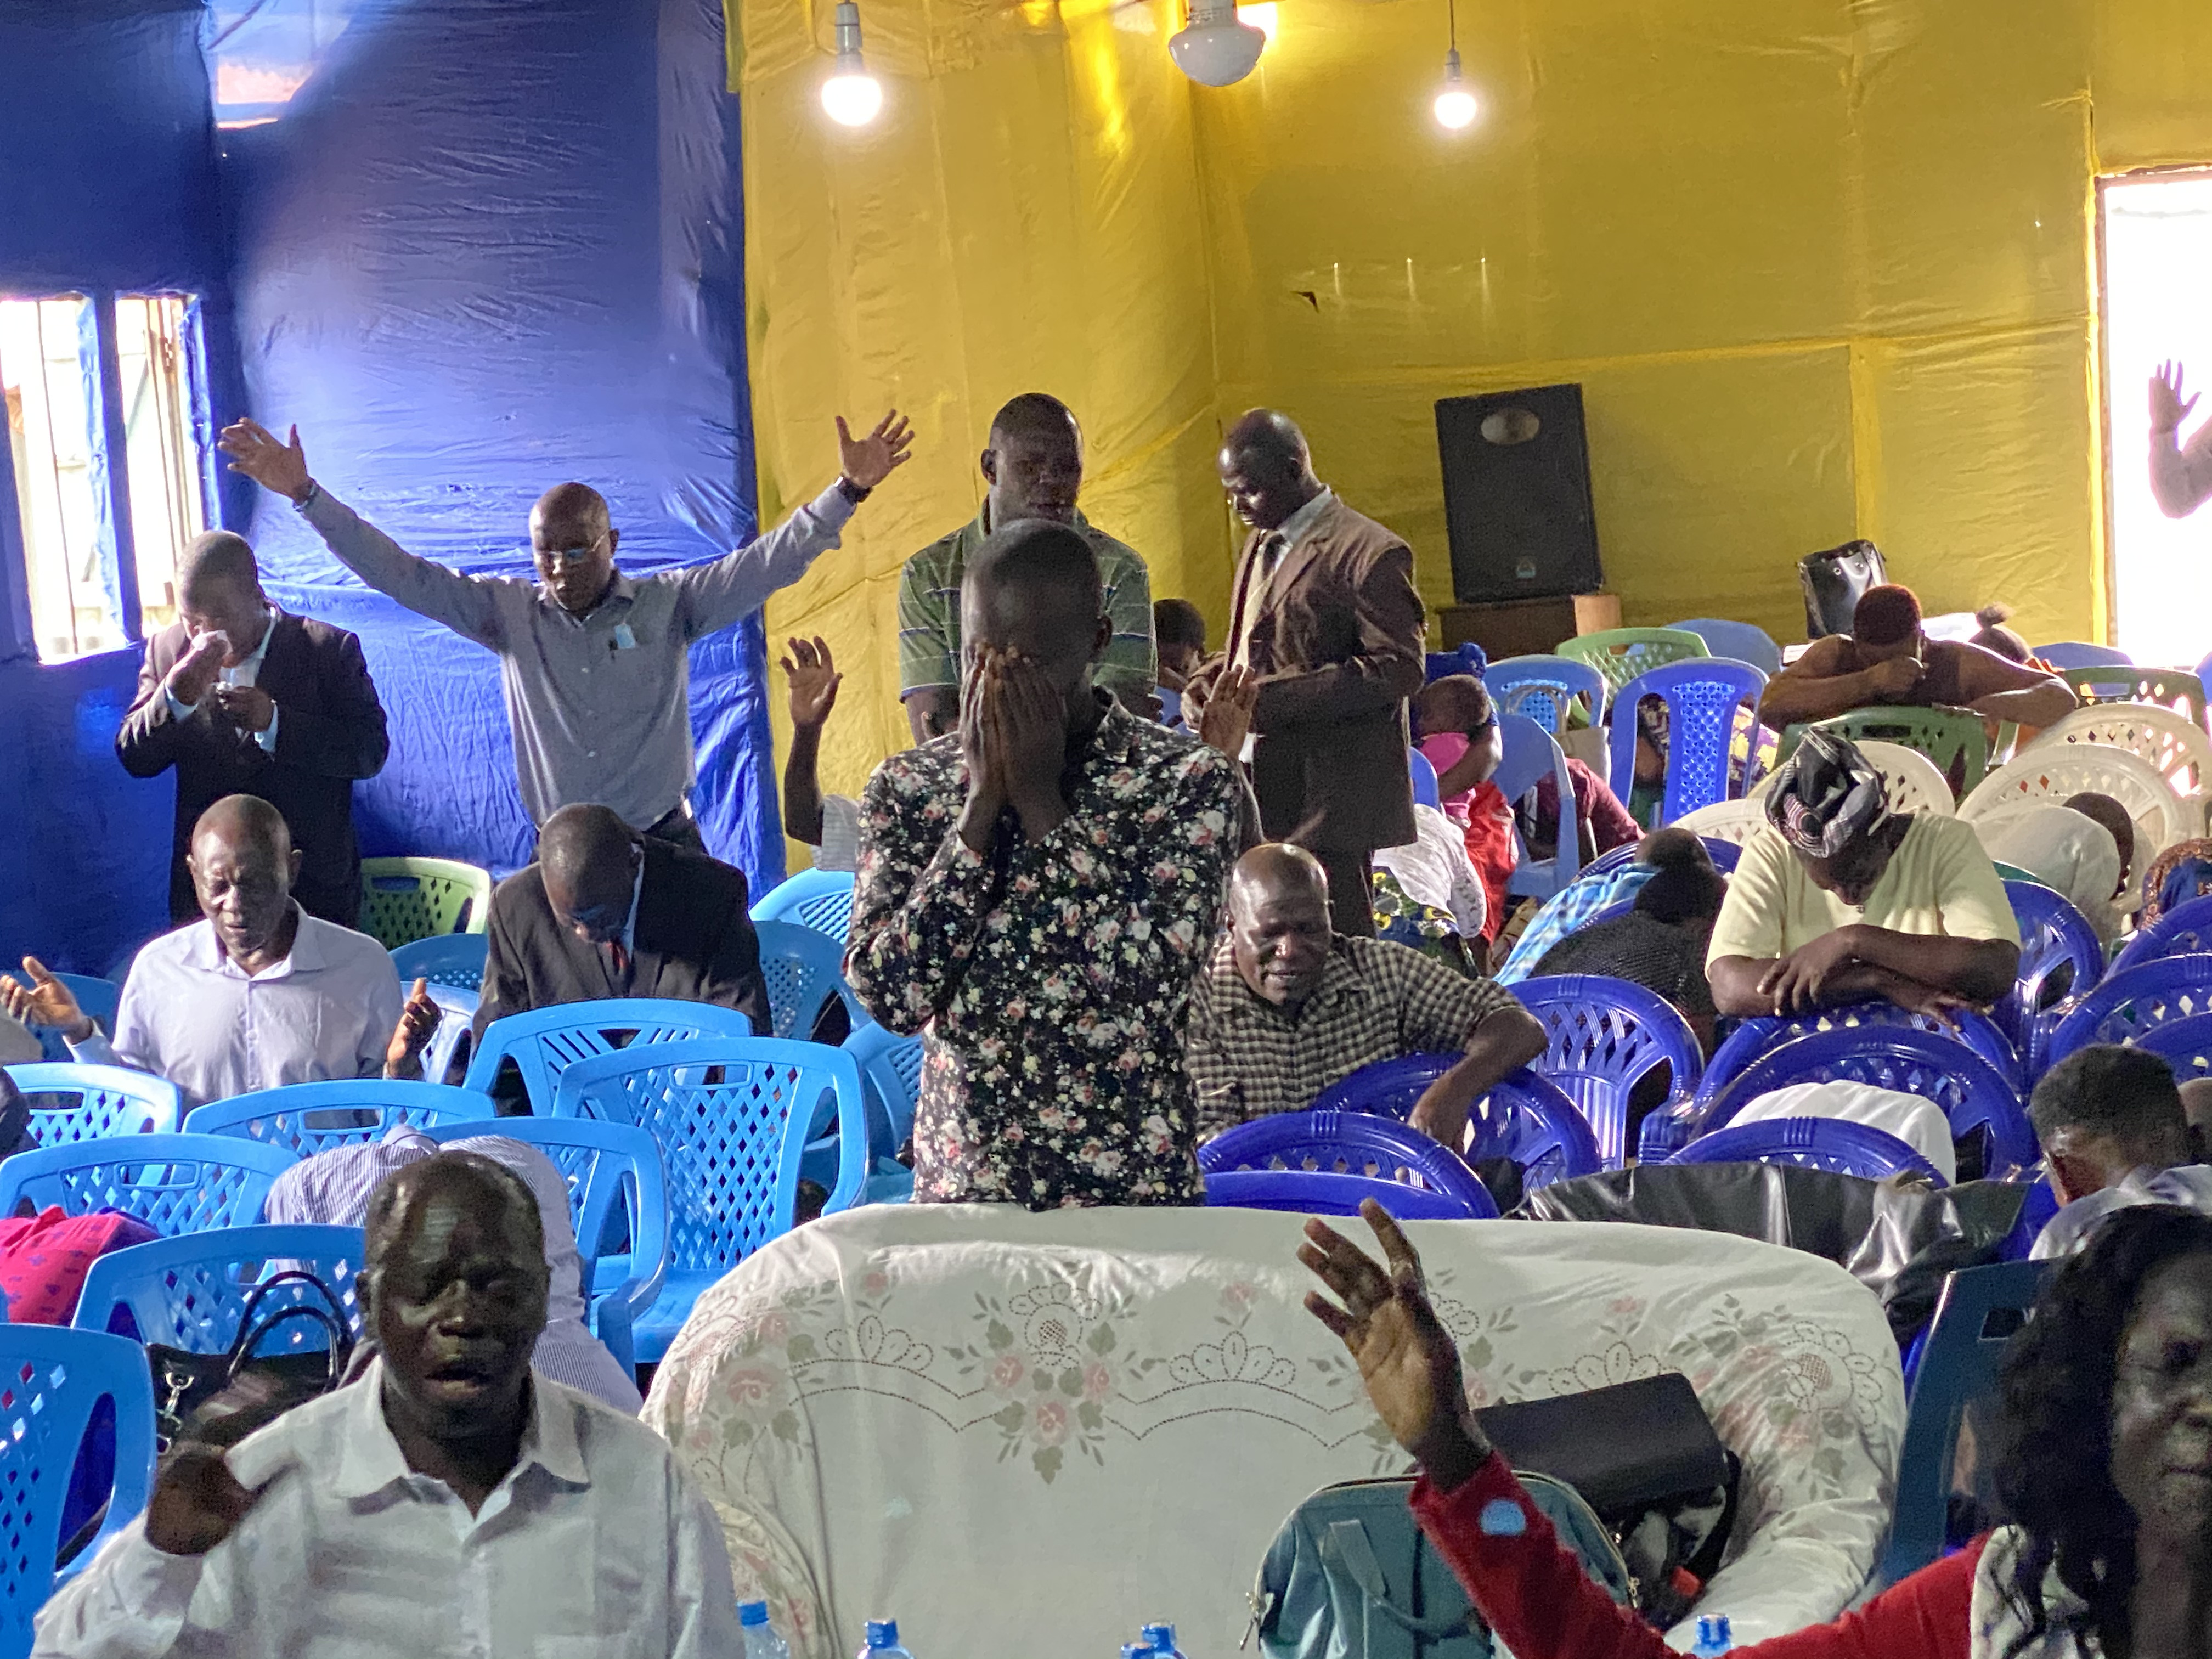 Spirit of God moving the hearts of men in Manyatta.  There was no alter call, no plea from the microphone, the spirit of the Lord moved people's hearts to prayer.  Truly an amazing experience.